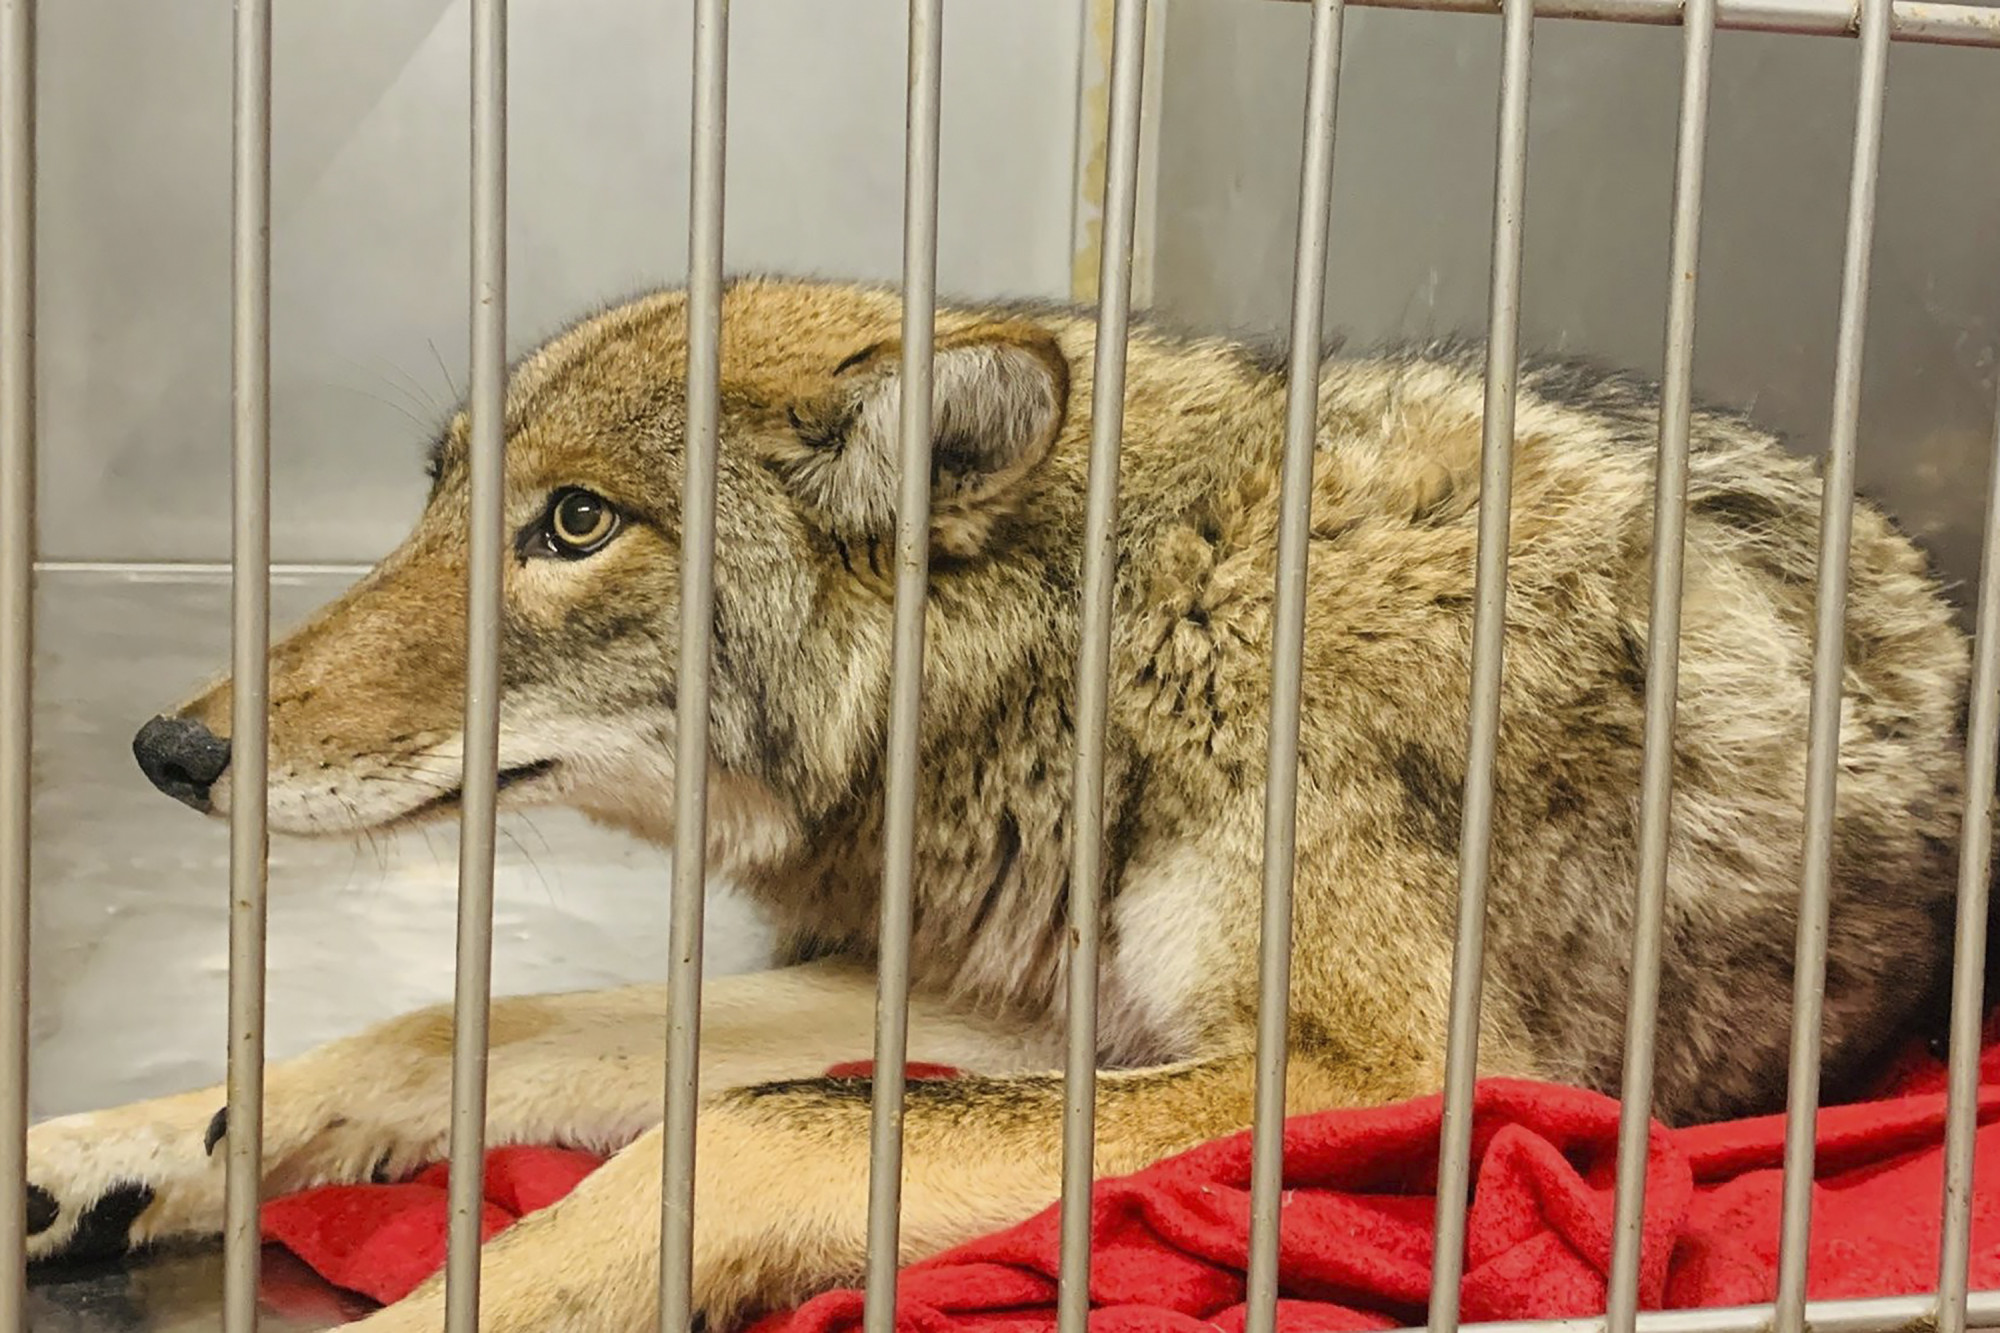 Official: DNA Test to Determine If Coyote Bit Chicago Child